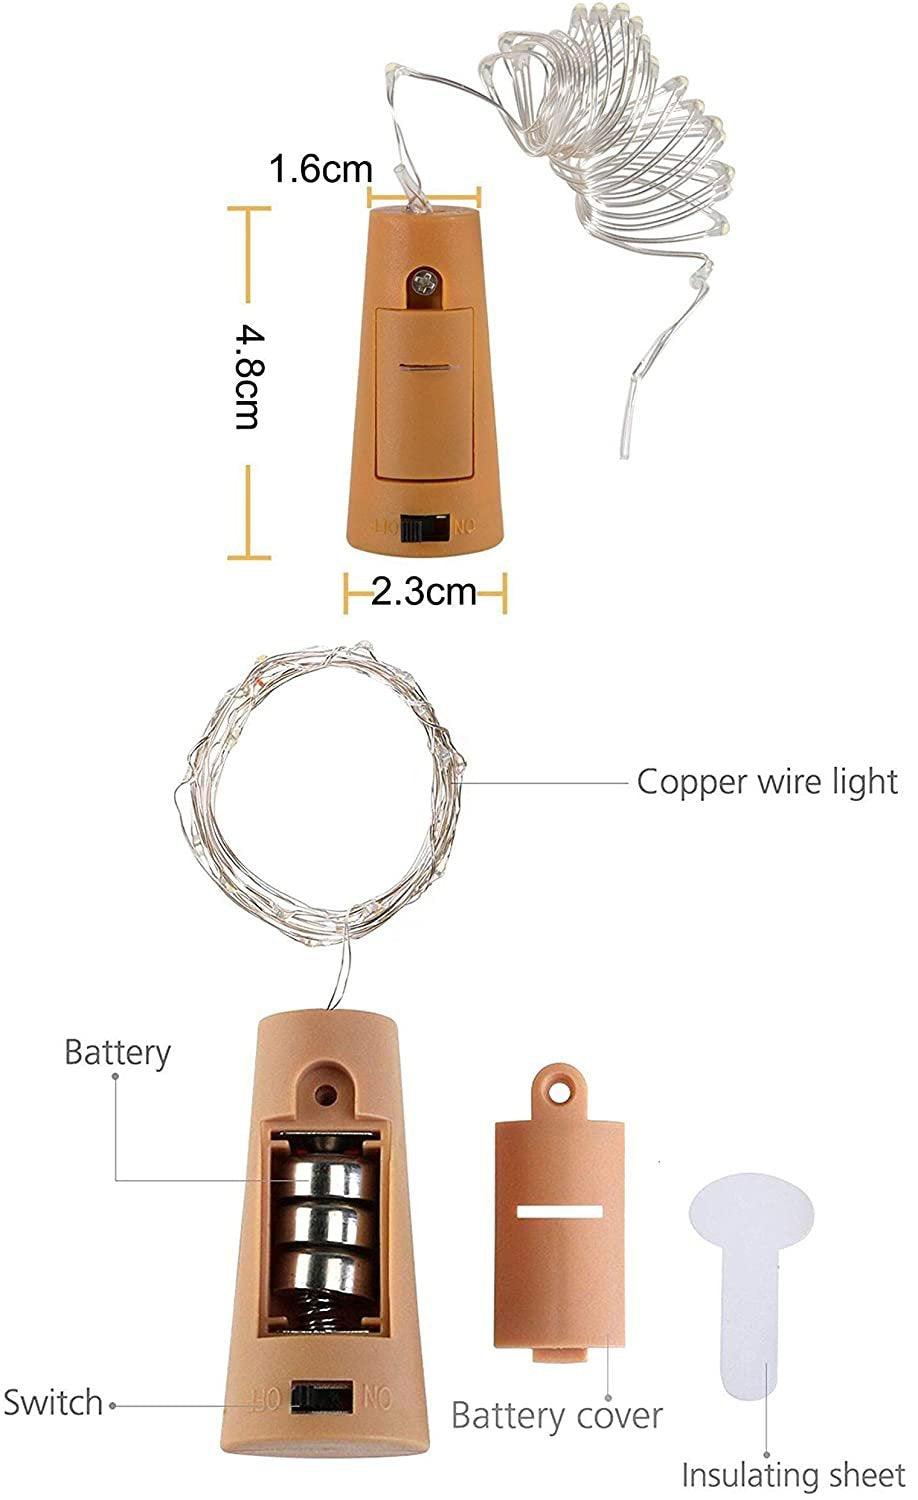 Wine Bottle Lights with Cork for Home Decorations - If you say i do